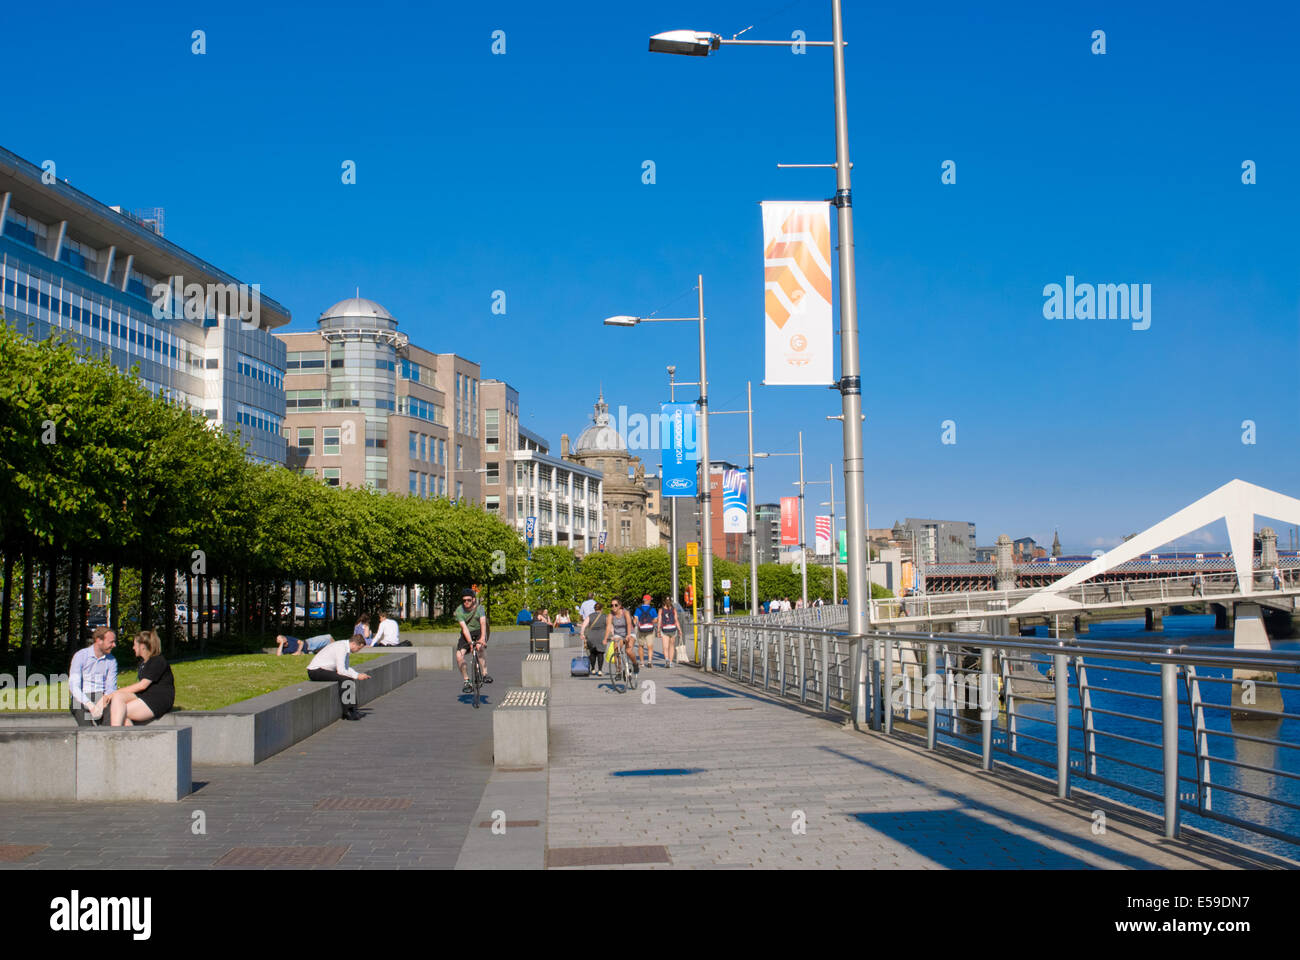 Commonwealth Games banners on the lamp posts at Broomielaw, Glasgow Stock Photo